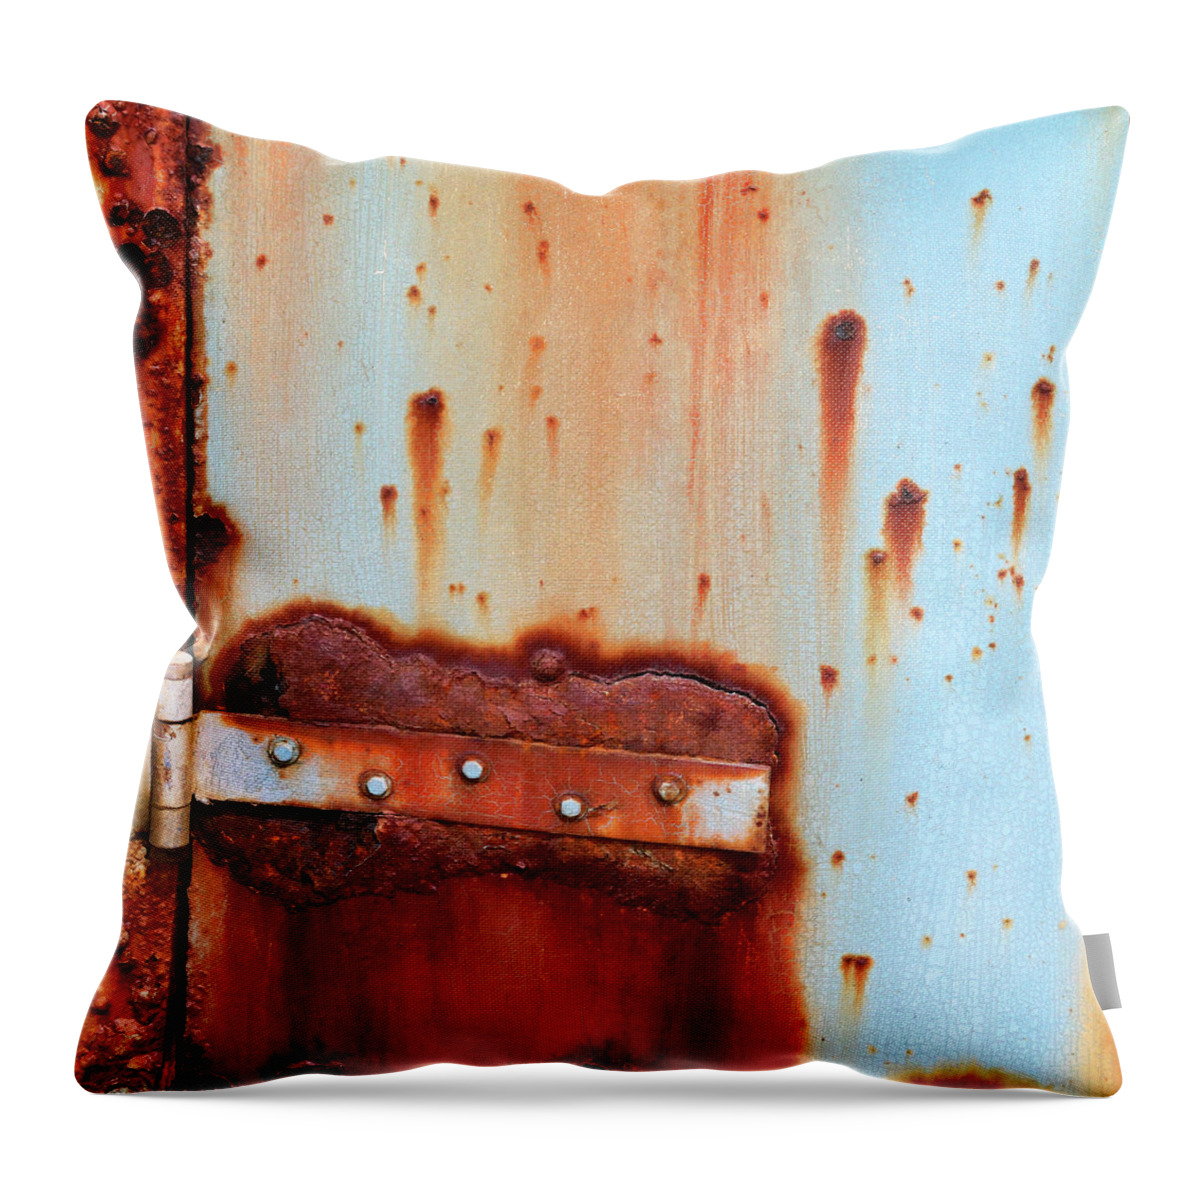 Point Montara Lighthouse Throw Pillow featuring the photograph Rusty Outbuilding by Art Block Collections